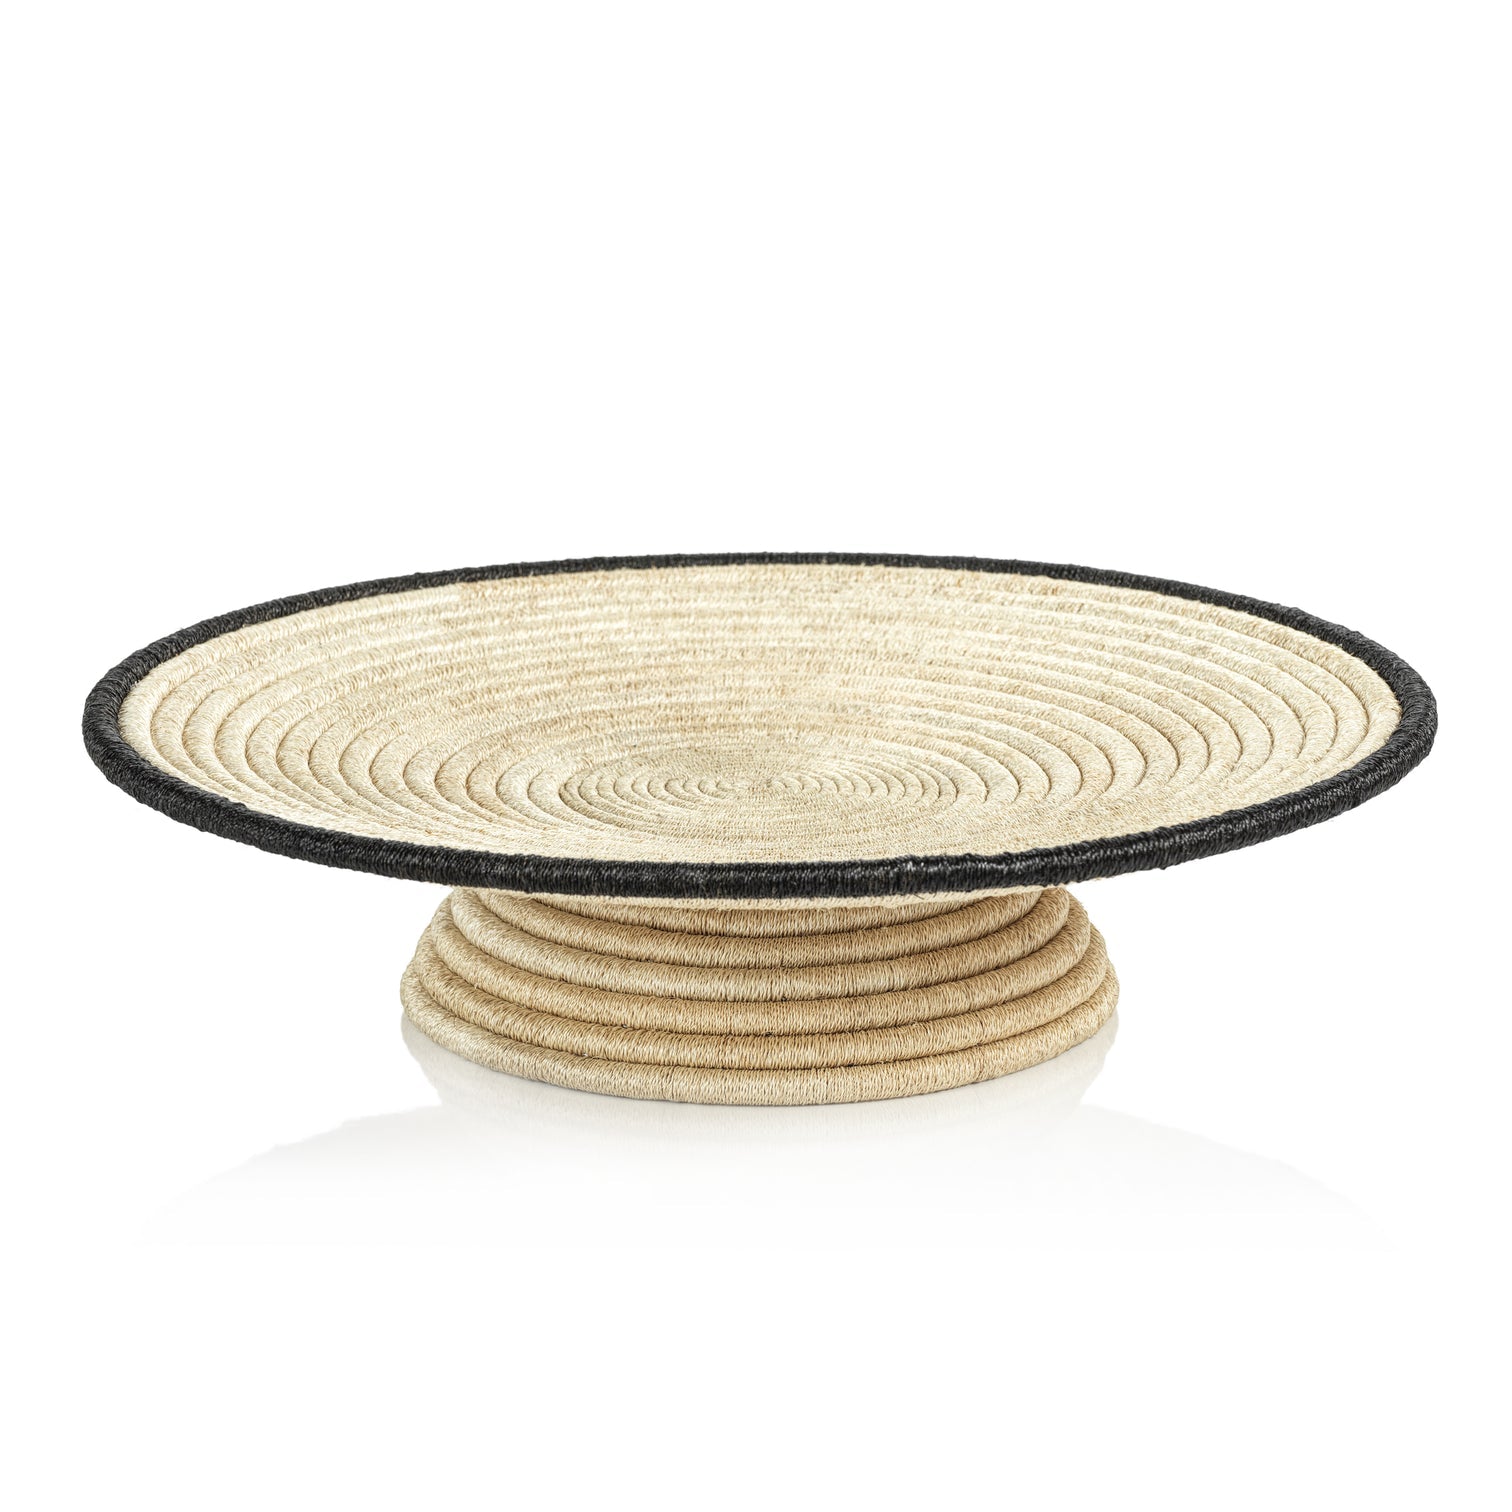 Martigues Coiled Abaca Footed Tray